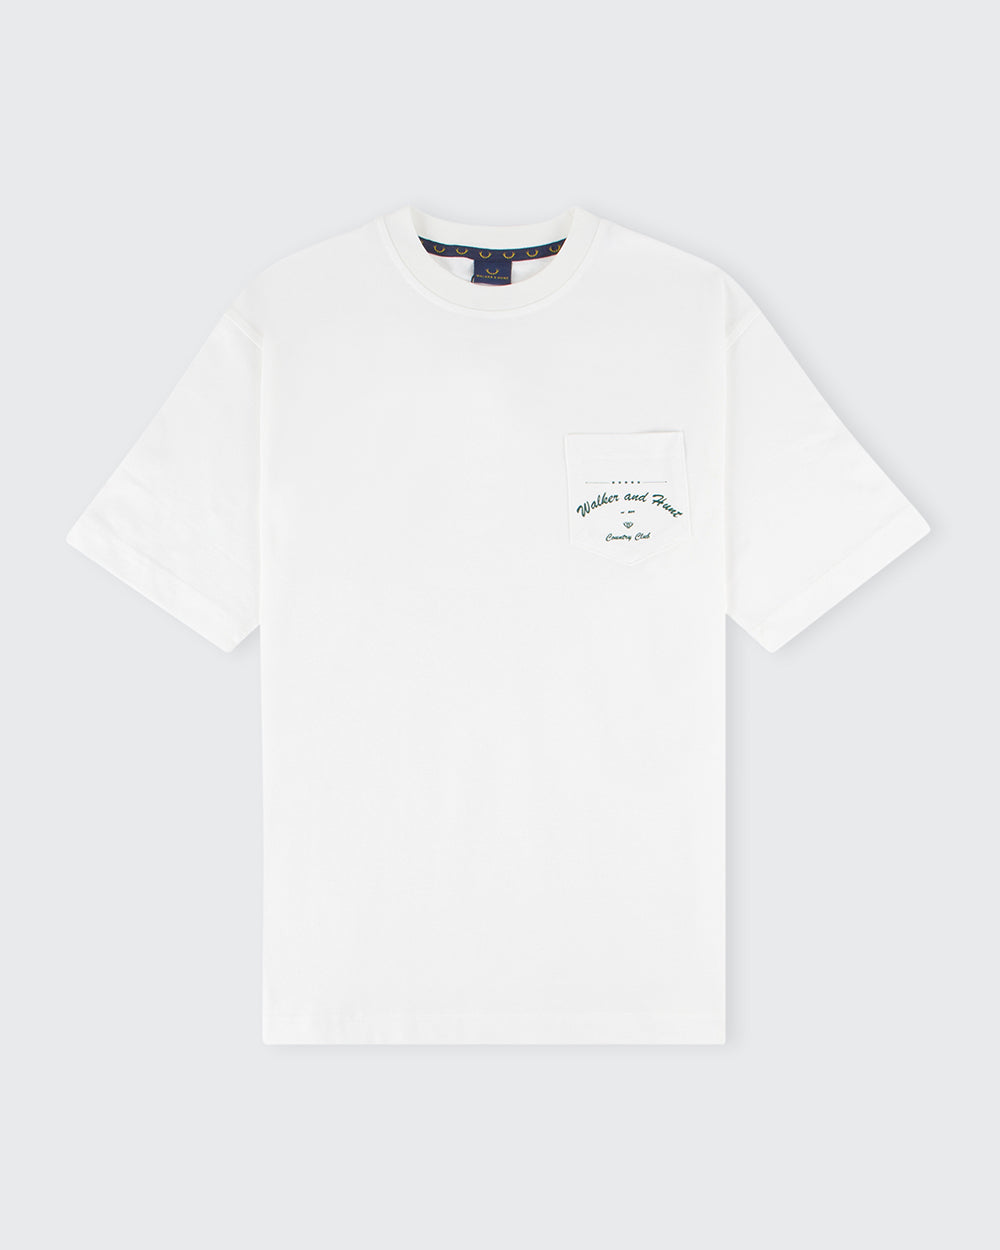 Country Club Tee - Off White